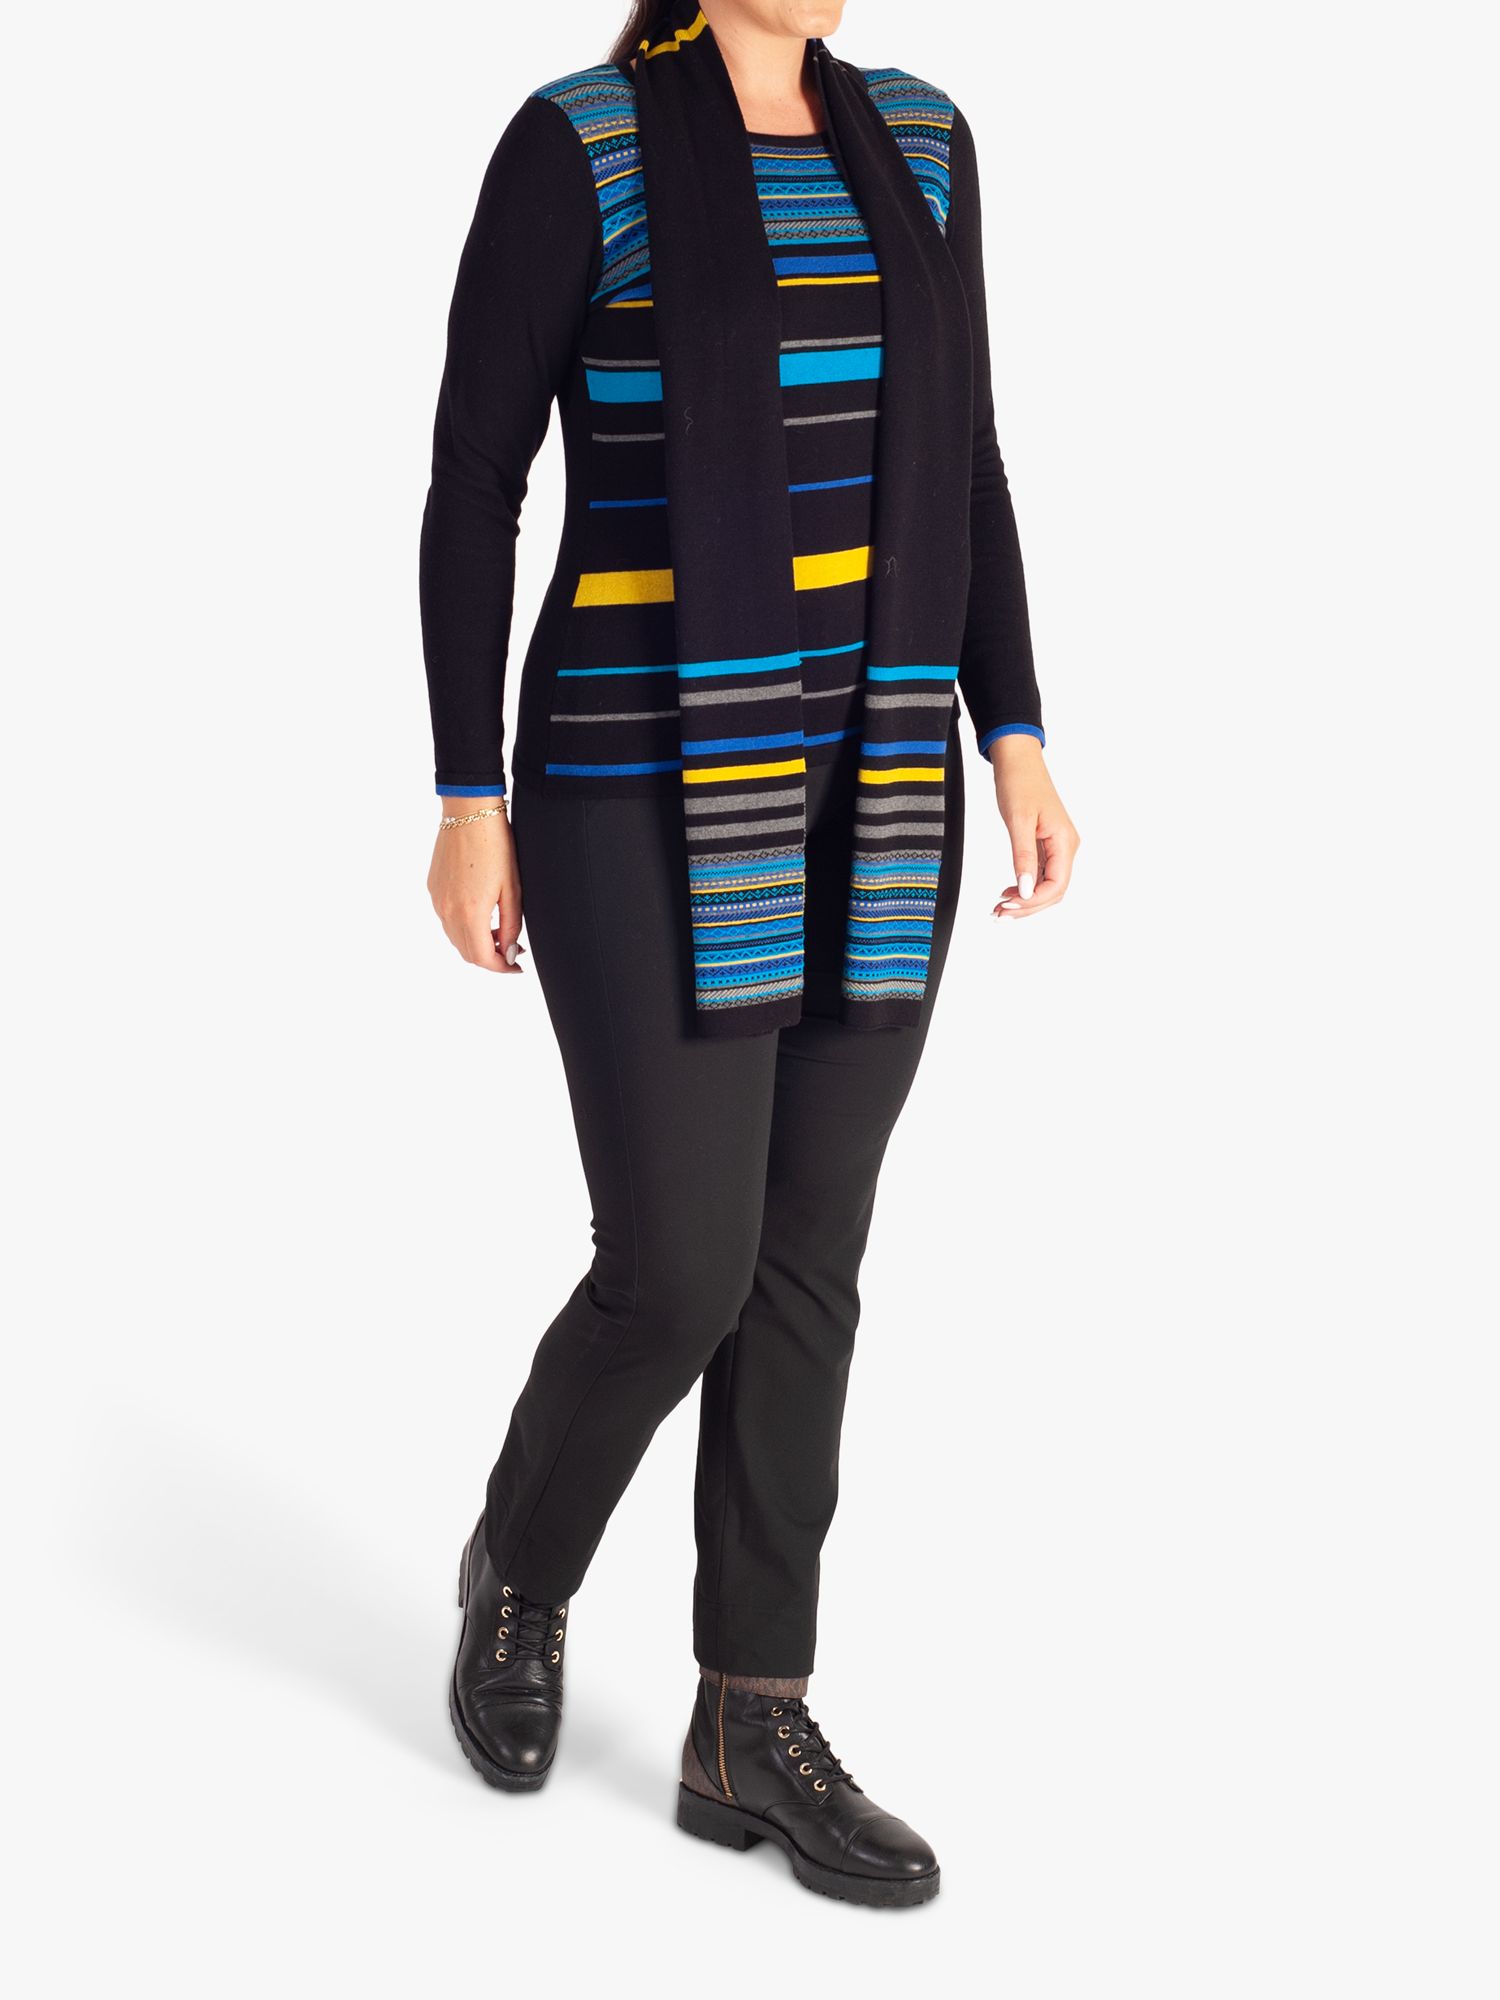 chesca Striped Jumper with Scarf, Black/Royal Blue, 22-24